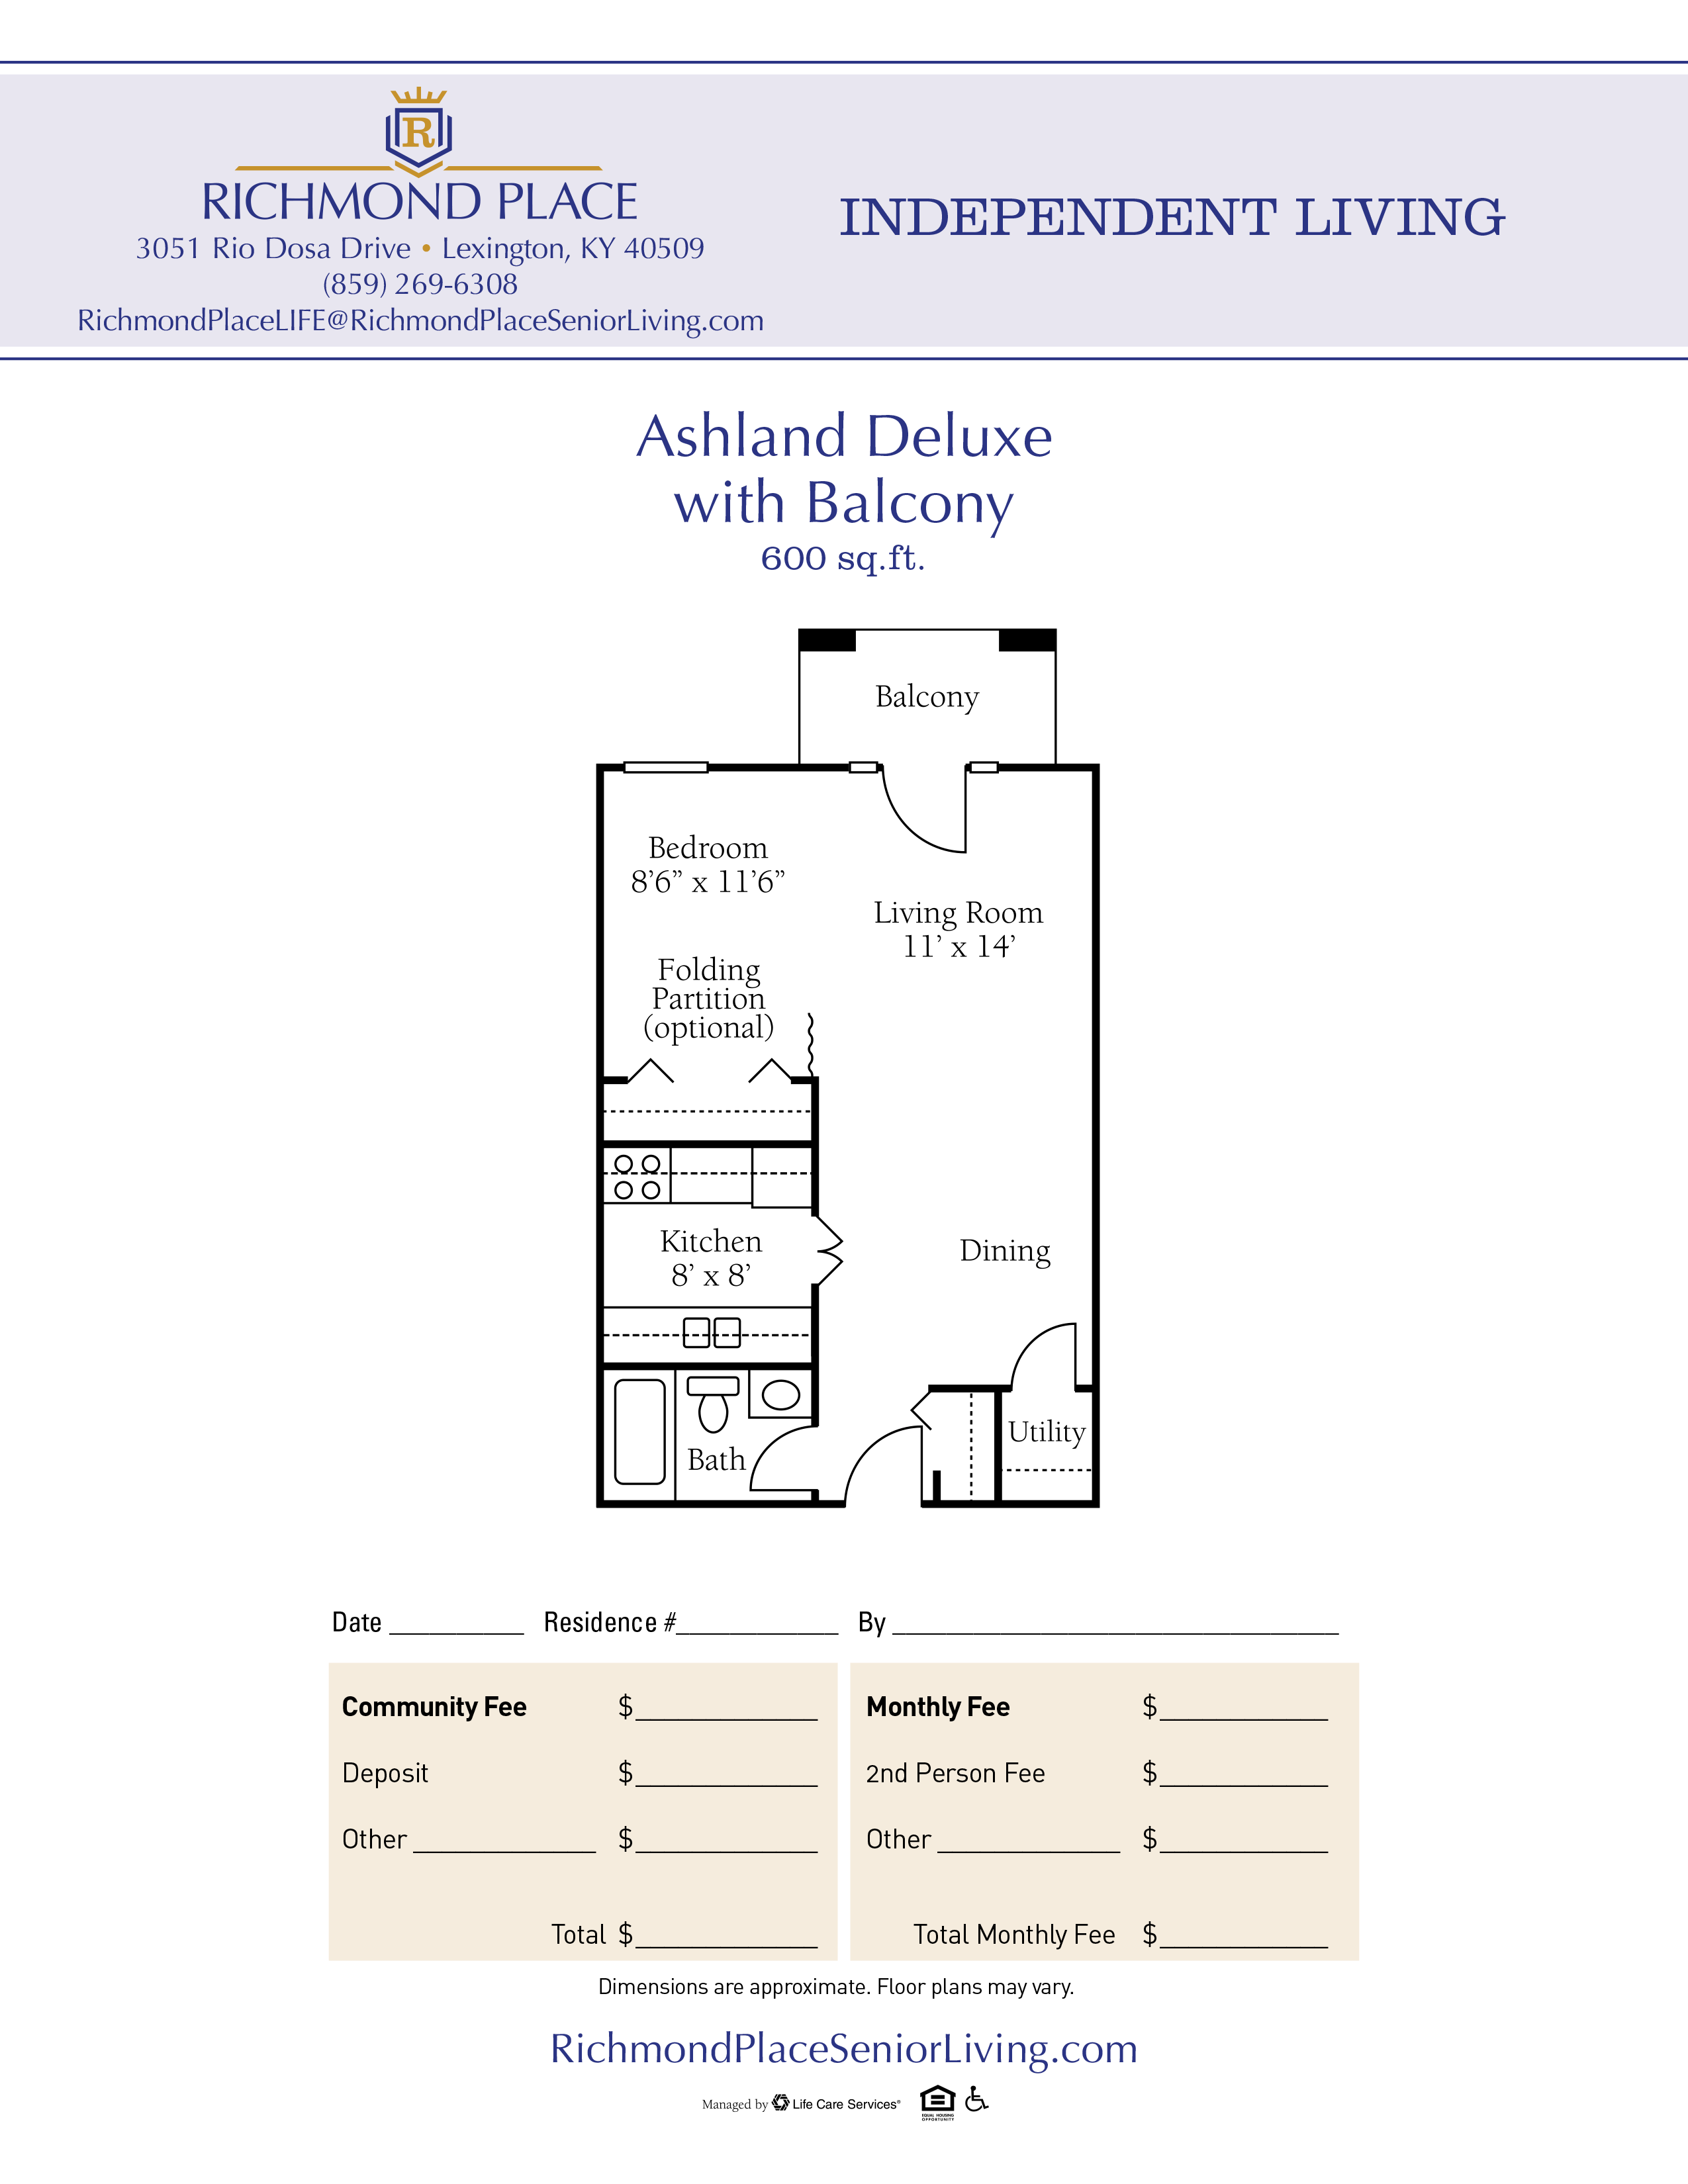 Floor plan of the Ashland Deluxe unit with balcony, Richmond Place Independent Living.